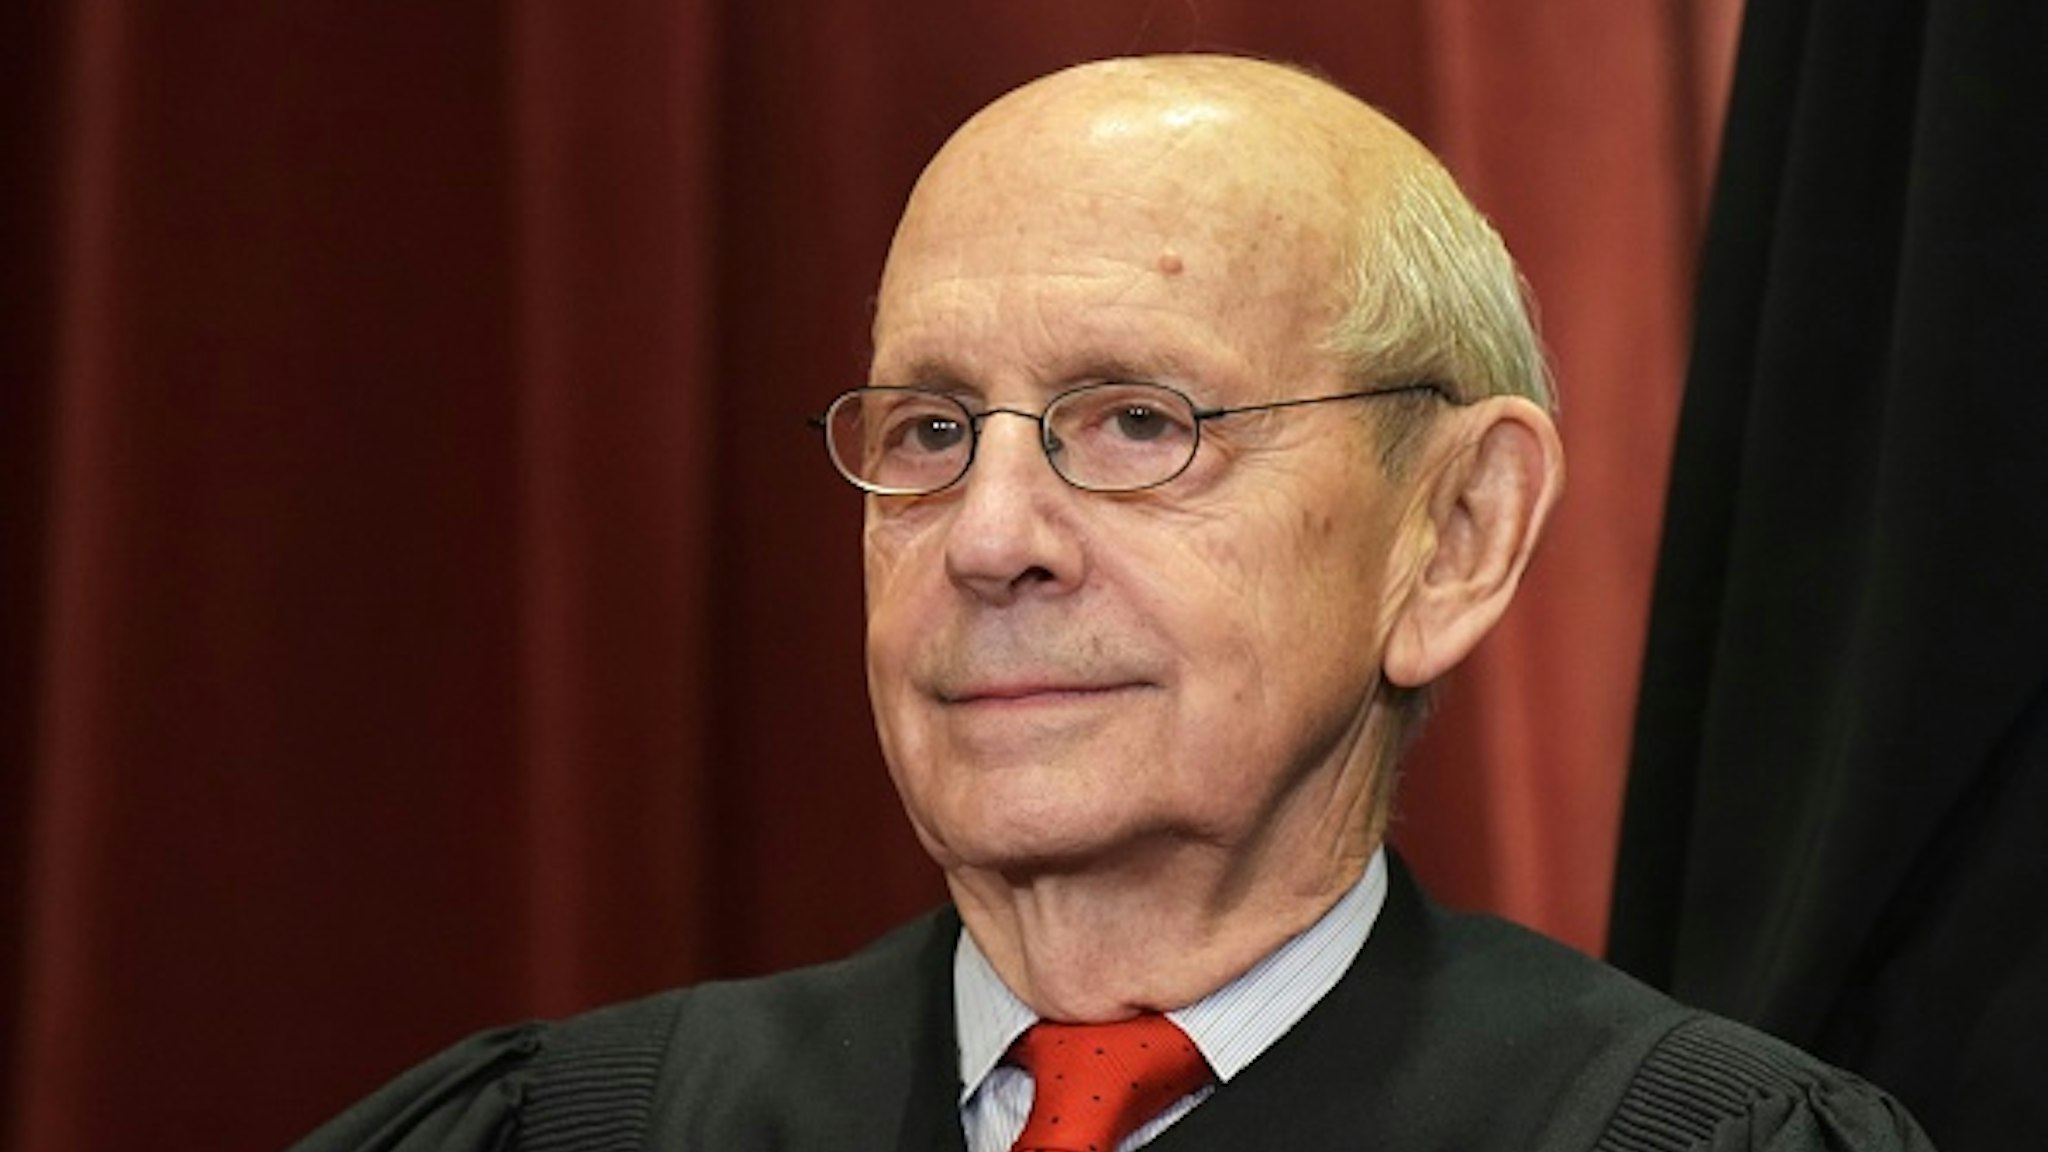 Associate Justice Stephen Breyer poses for the official group photo at the US Supreme Court in Washington, DC on November 30, 2018.